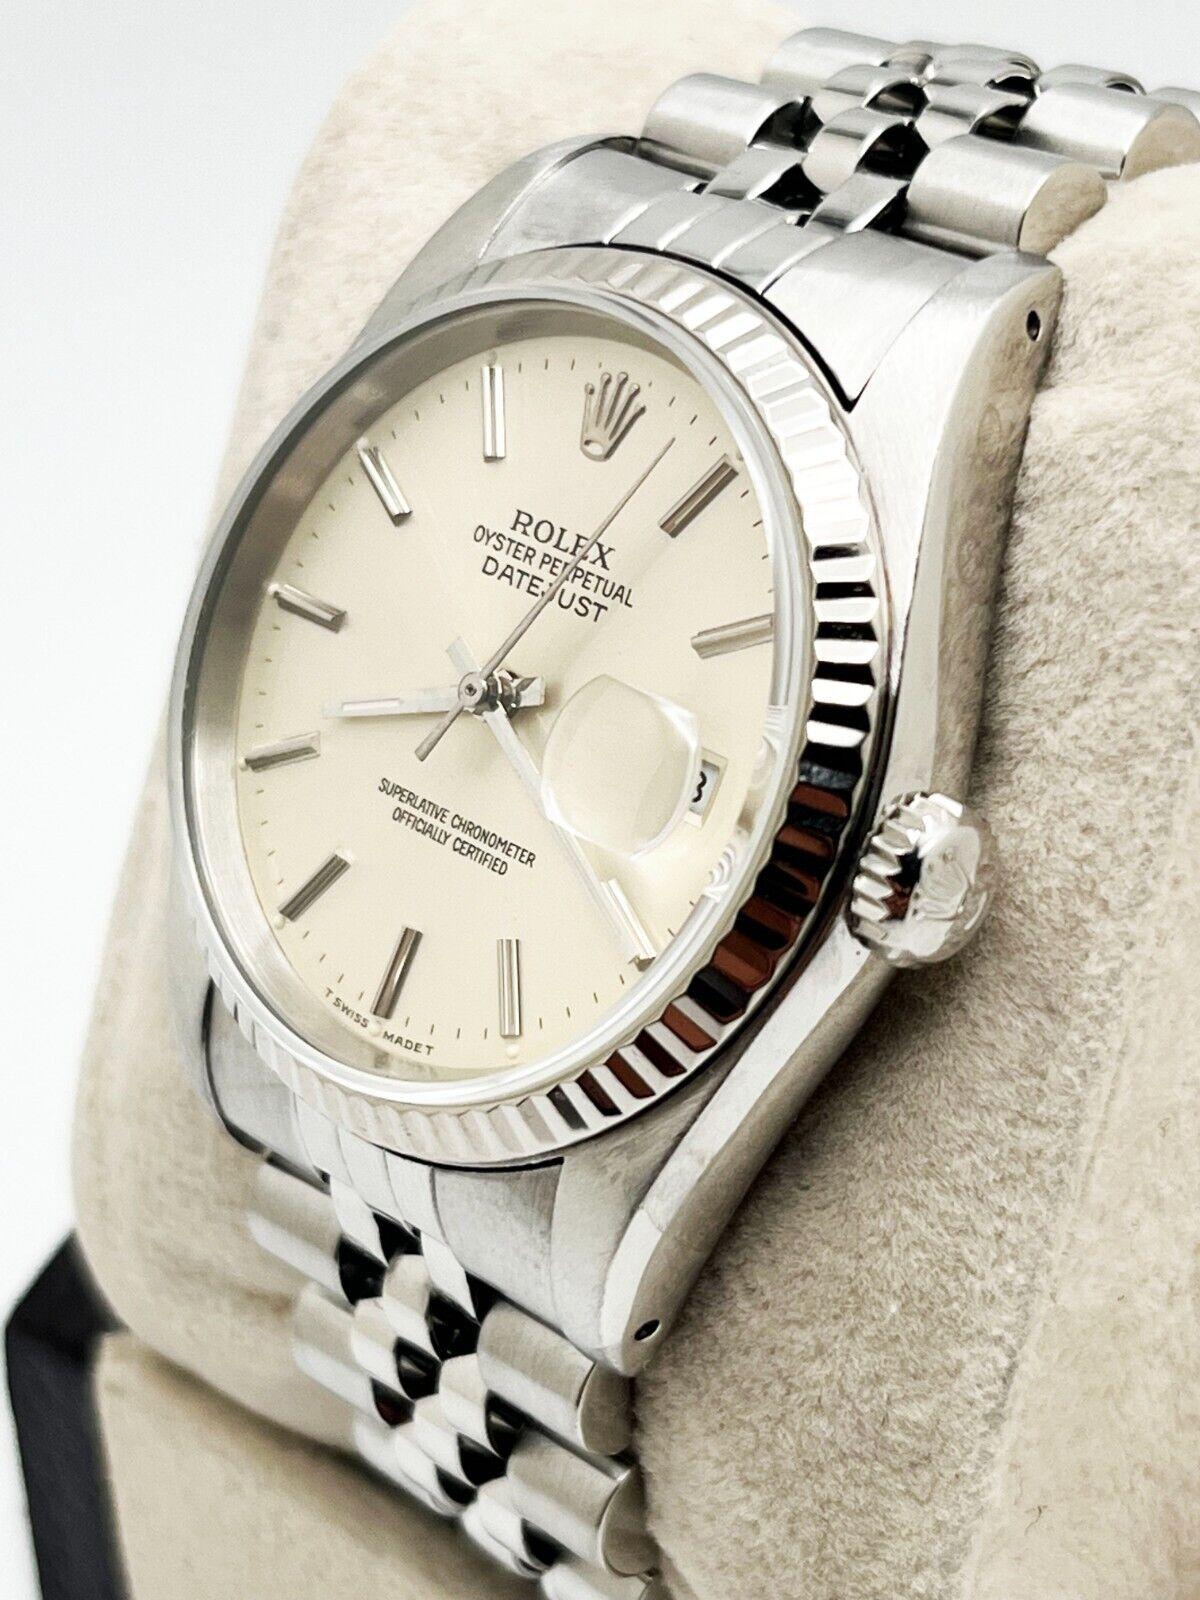 Rolex 16234 Datejust Silver Dial Stainless Steel In Excellent Condition For Sale In San Diego, CA